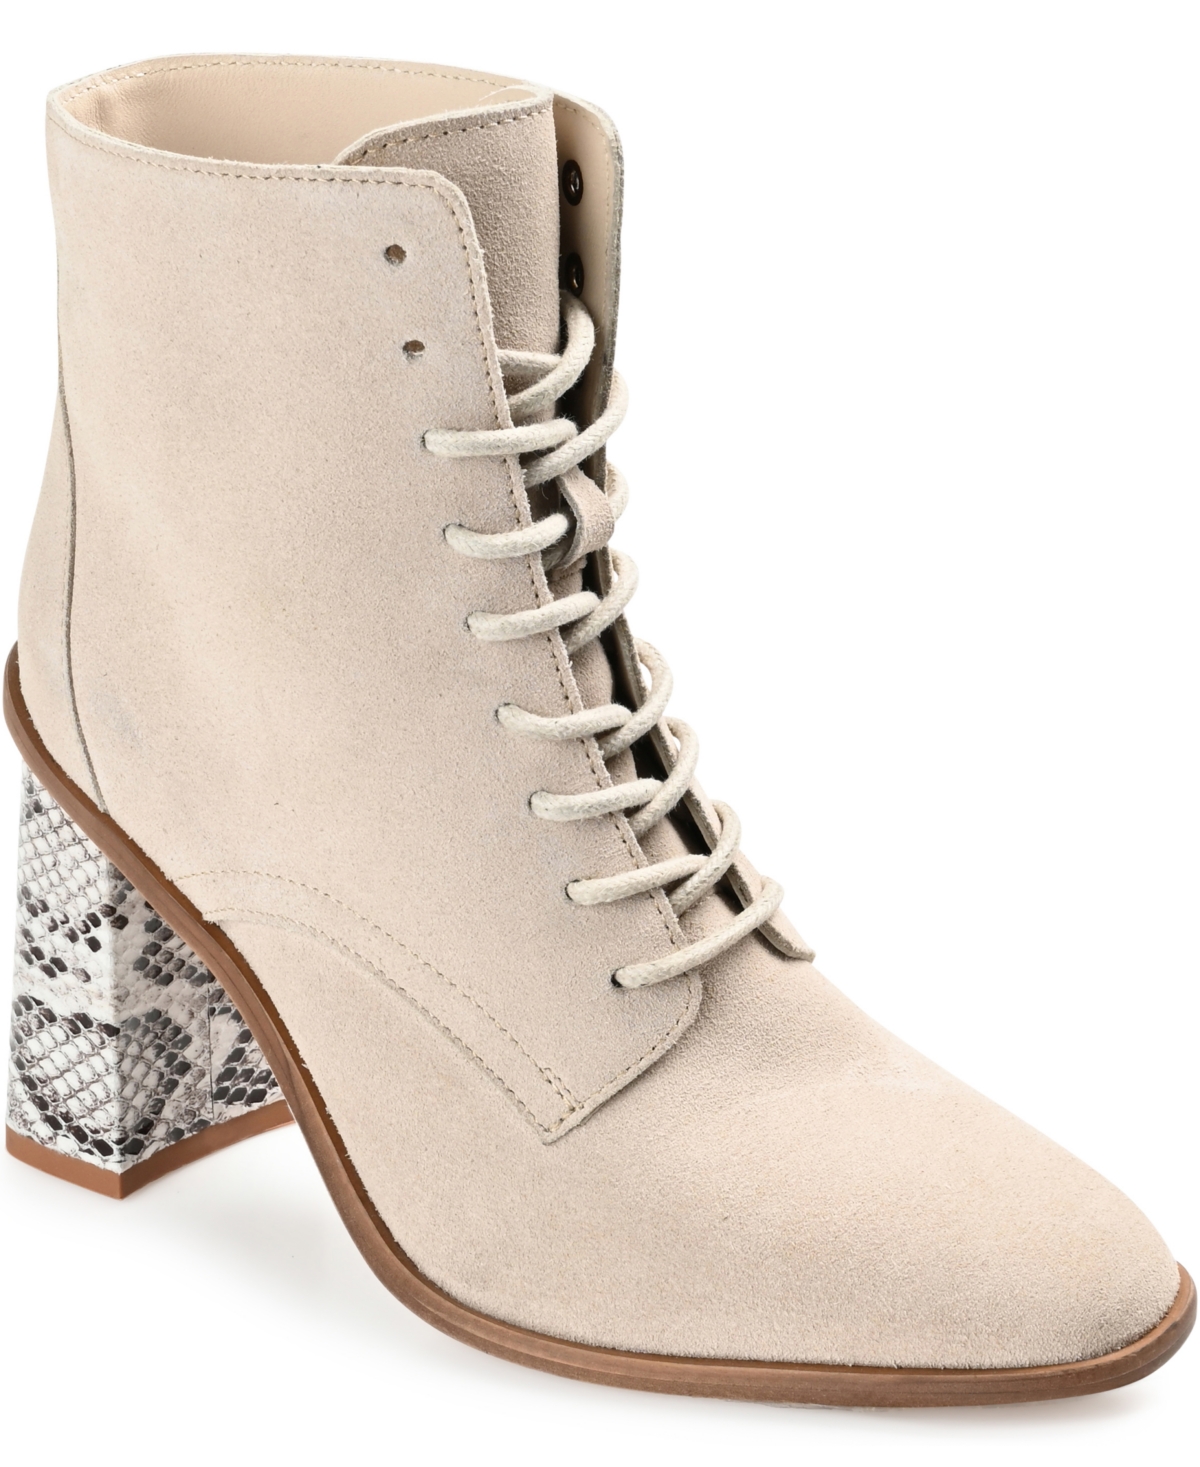 Women's Edda Lace Up Booties - Sand